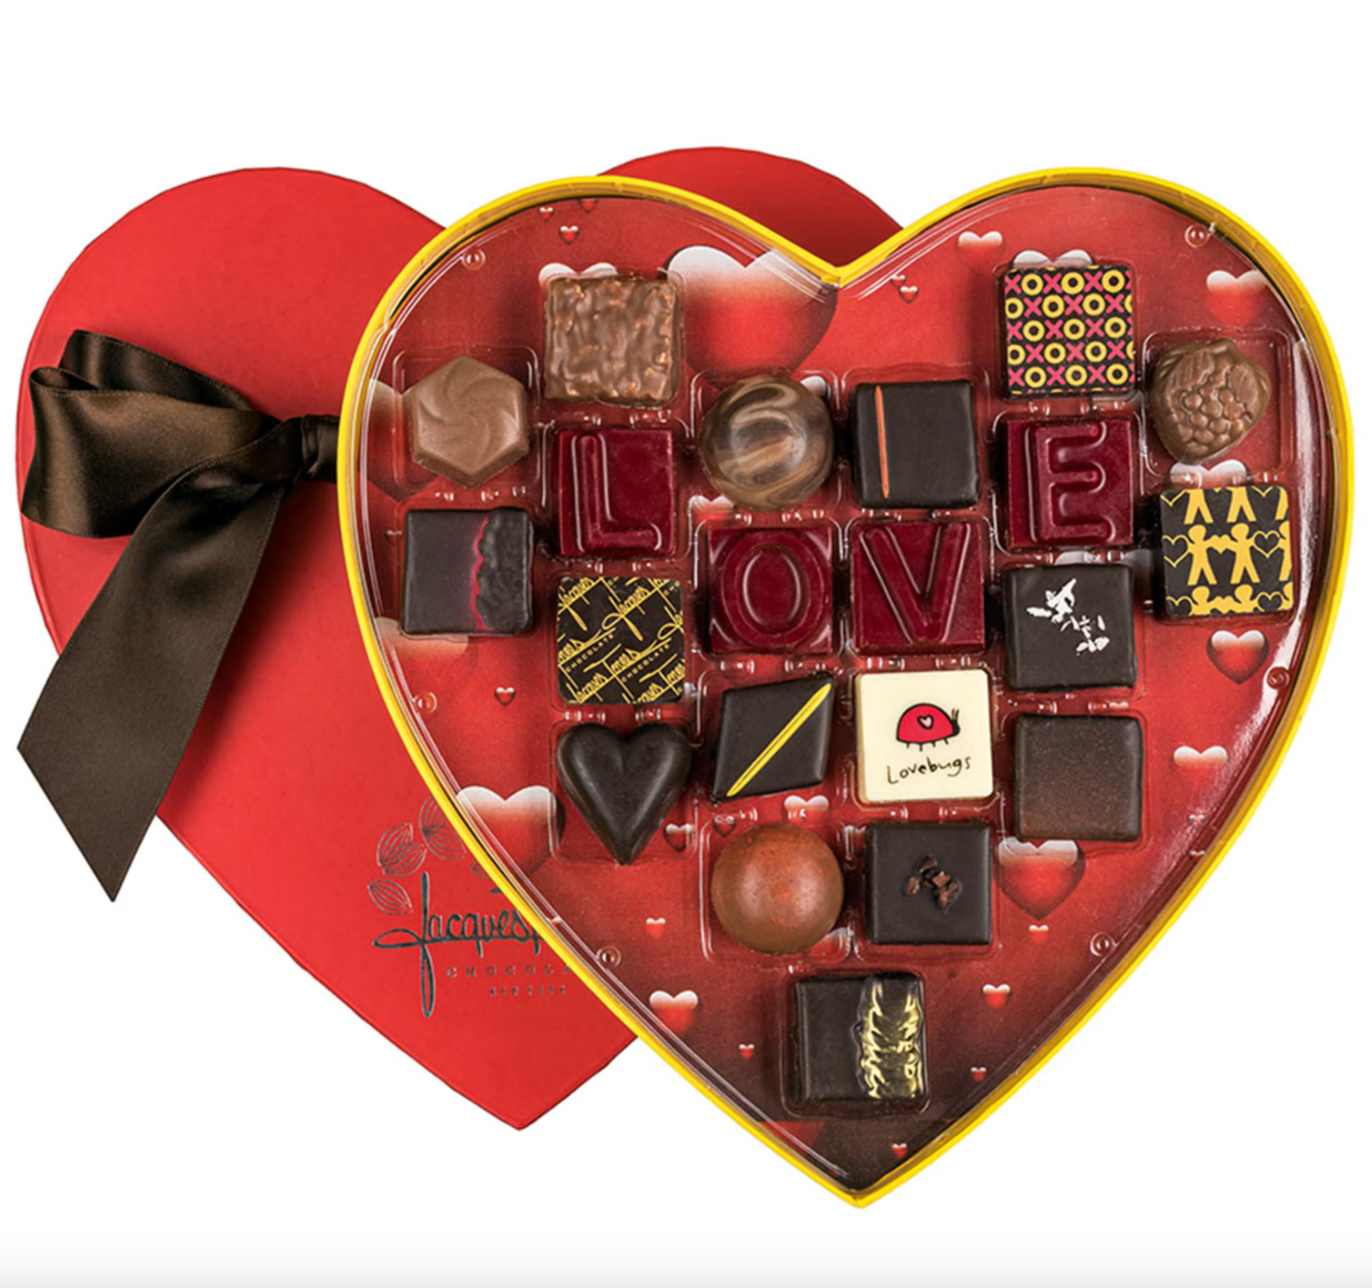 Jacques Torres Valentine's Day Chocolate Heart Box